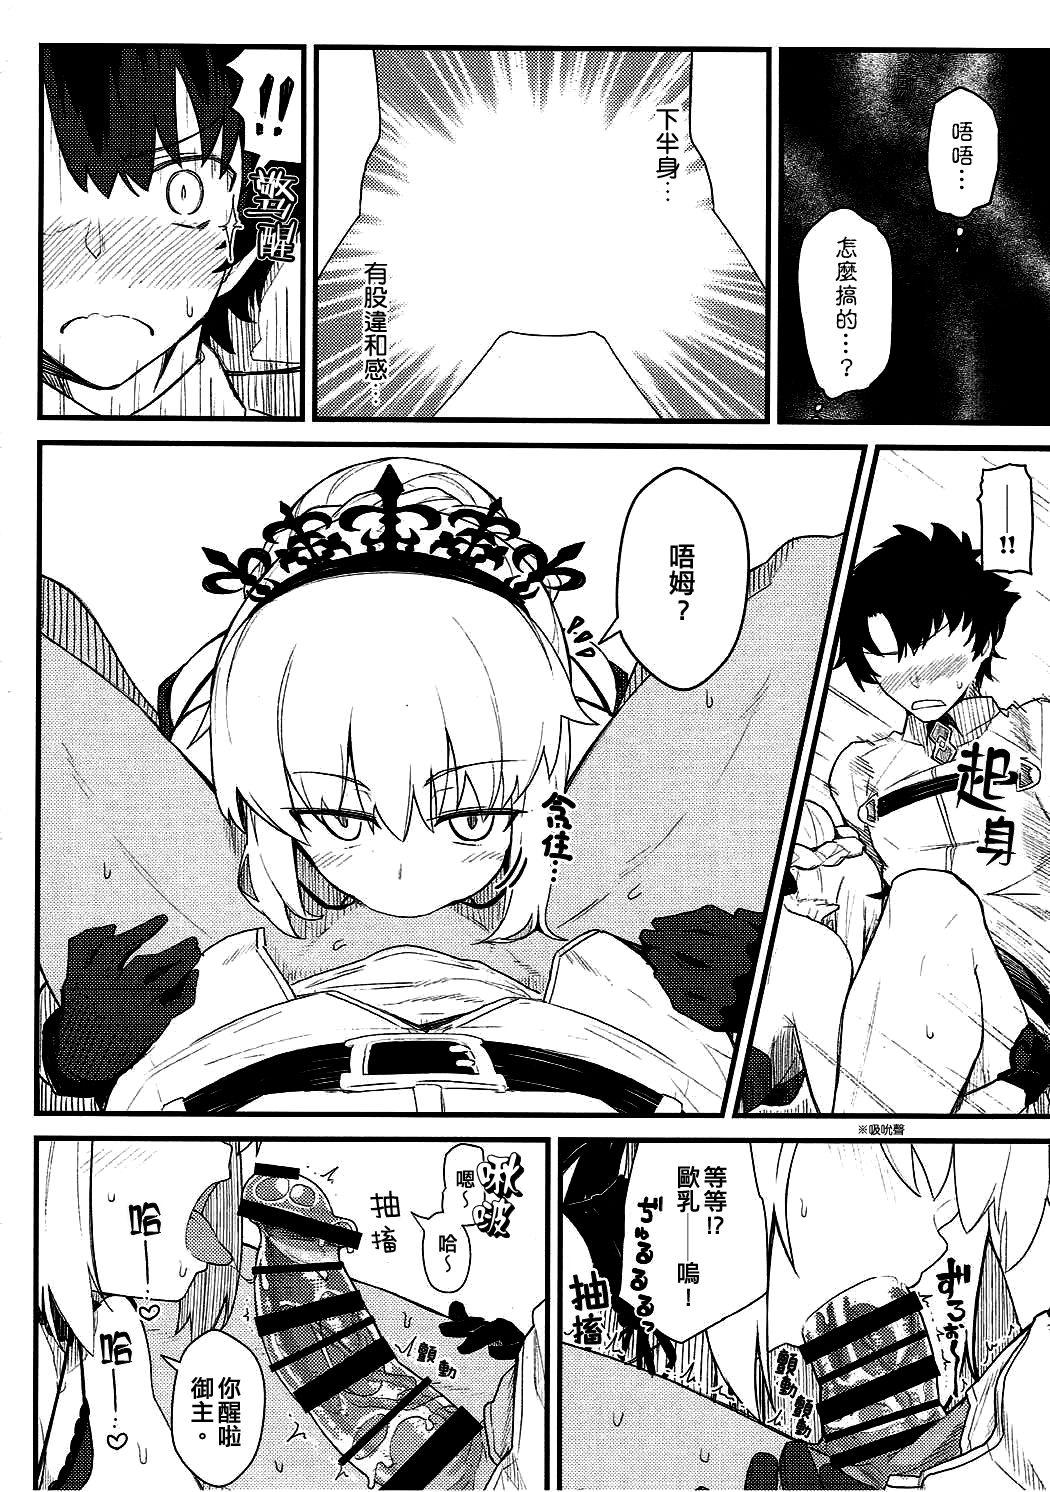 Gay Uniform GIRLFriend's 14 - Fate grand order Gay Military - Page 3